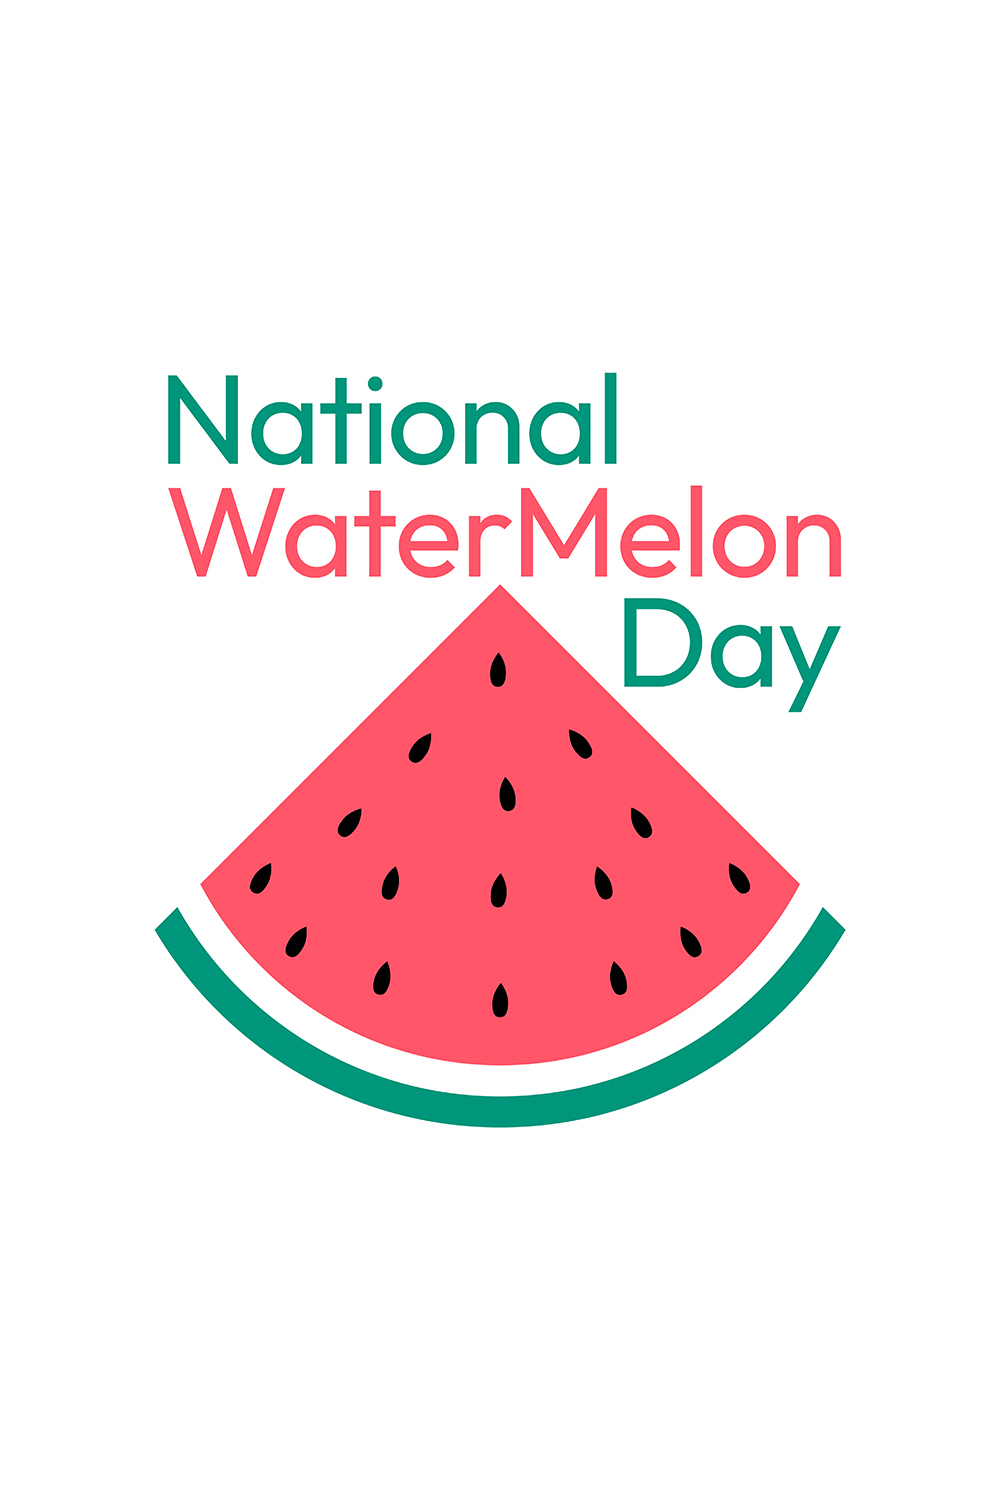 Watermelon, national watermelon day 3 august pinterest preview image.